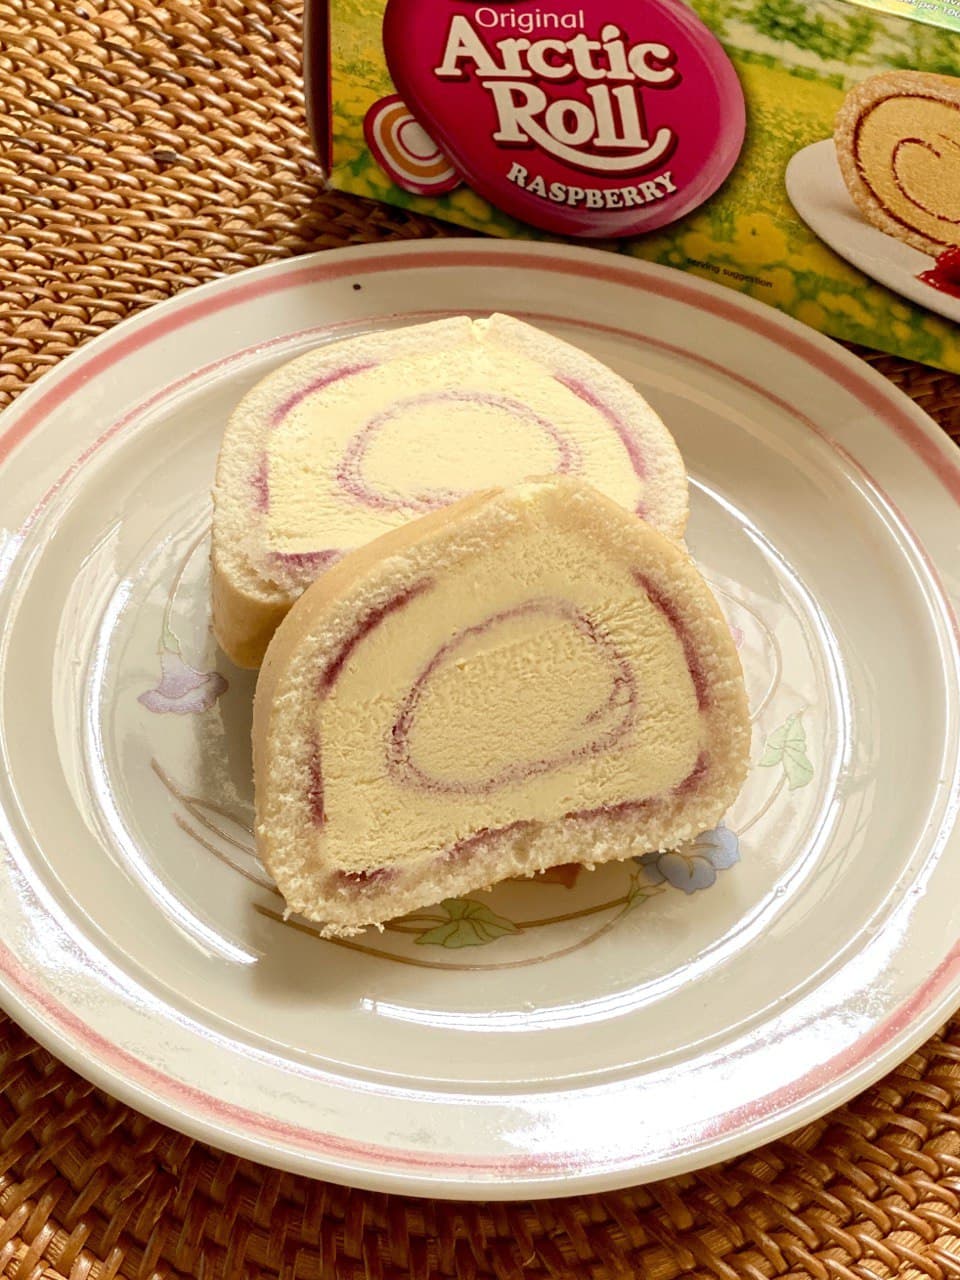 Arctic Roll, $5.45 (usual price $6.90)